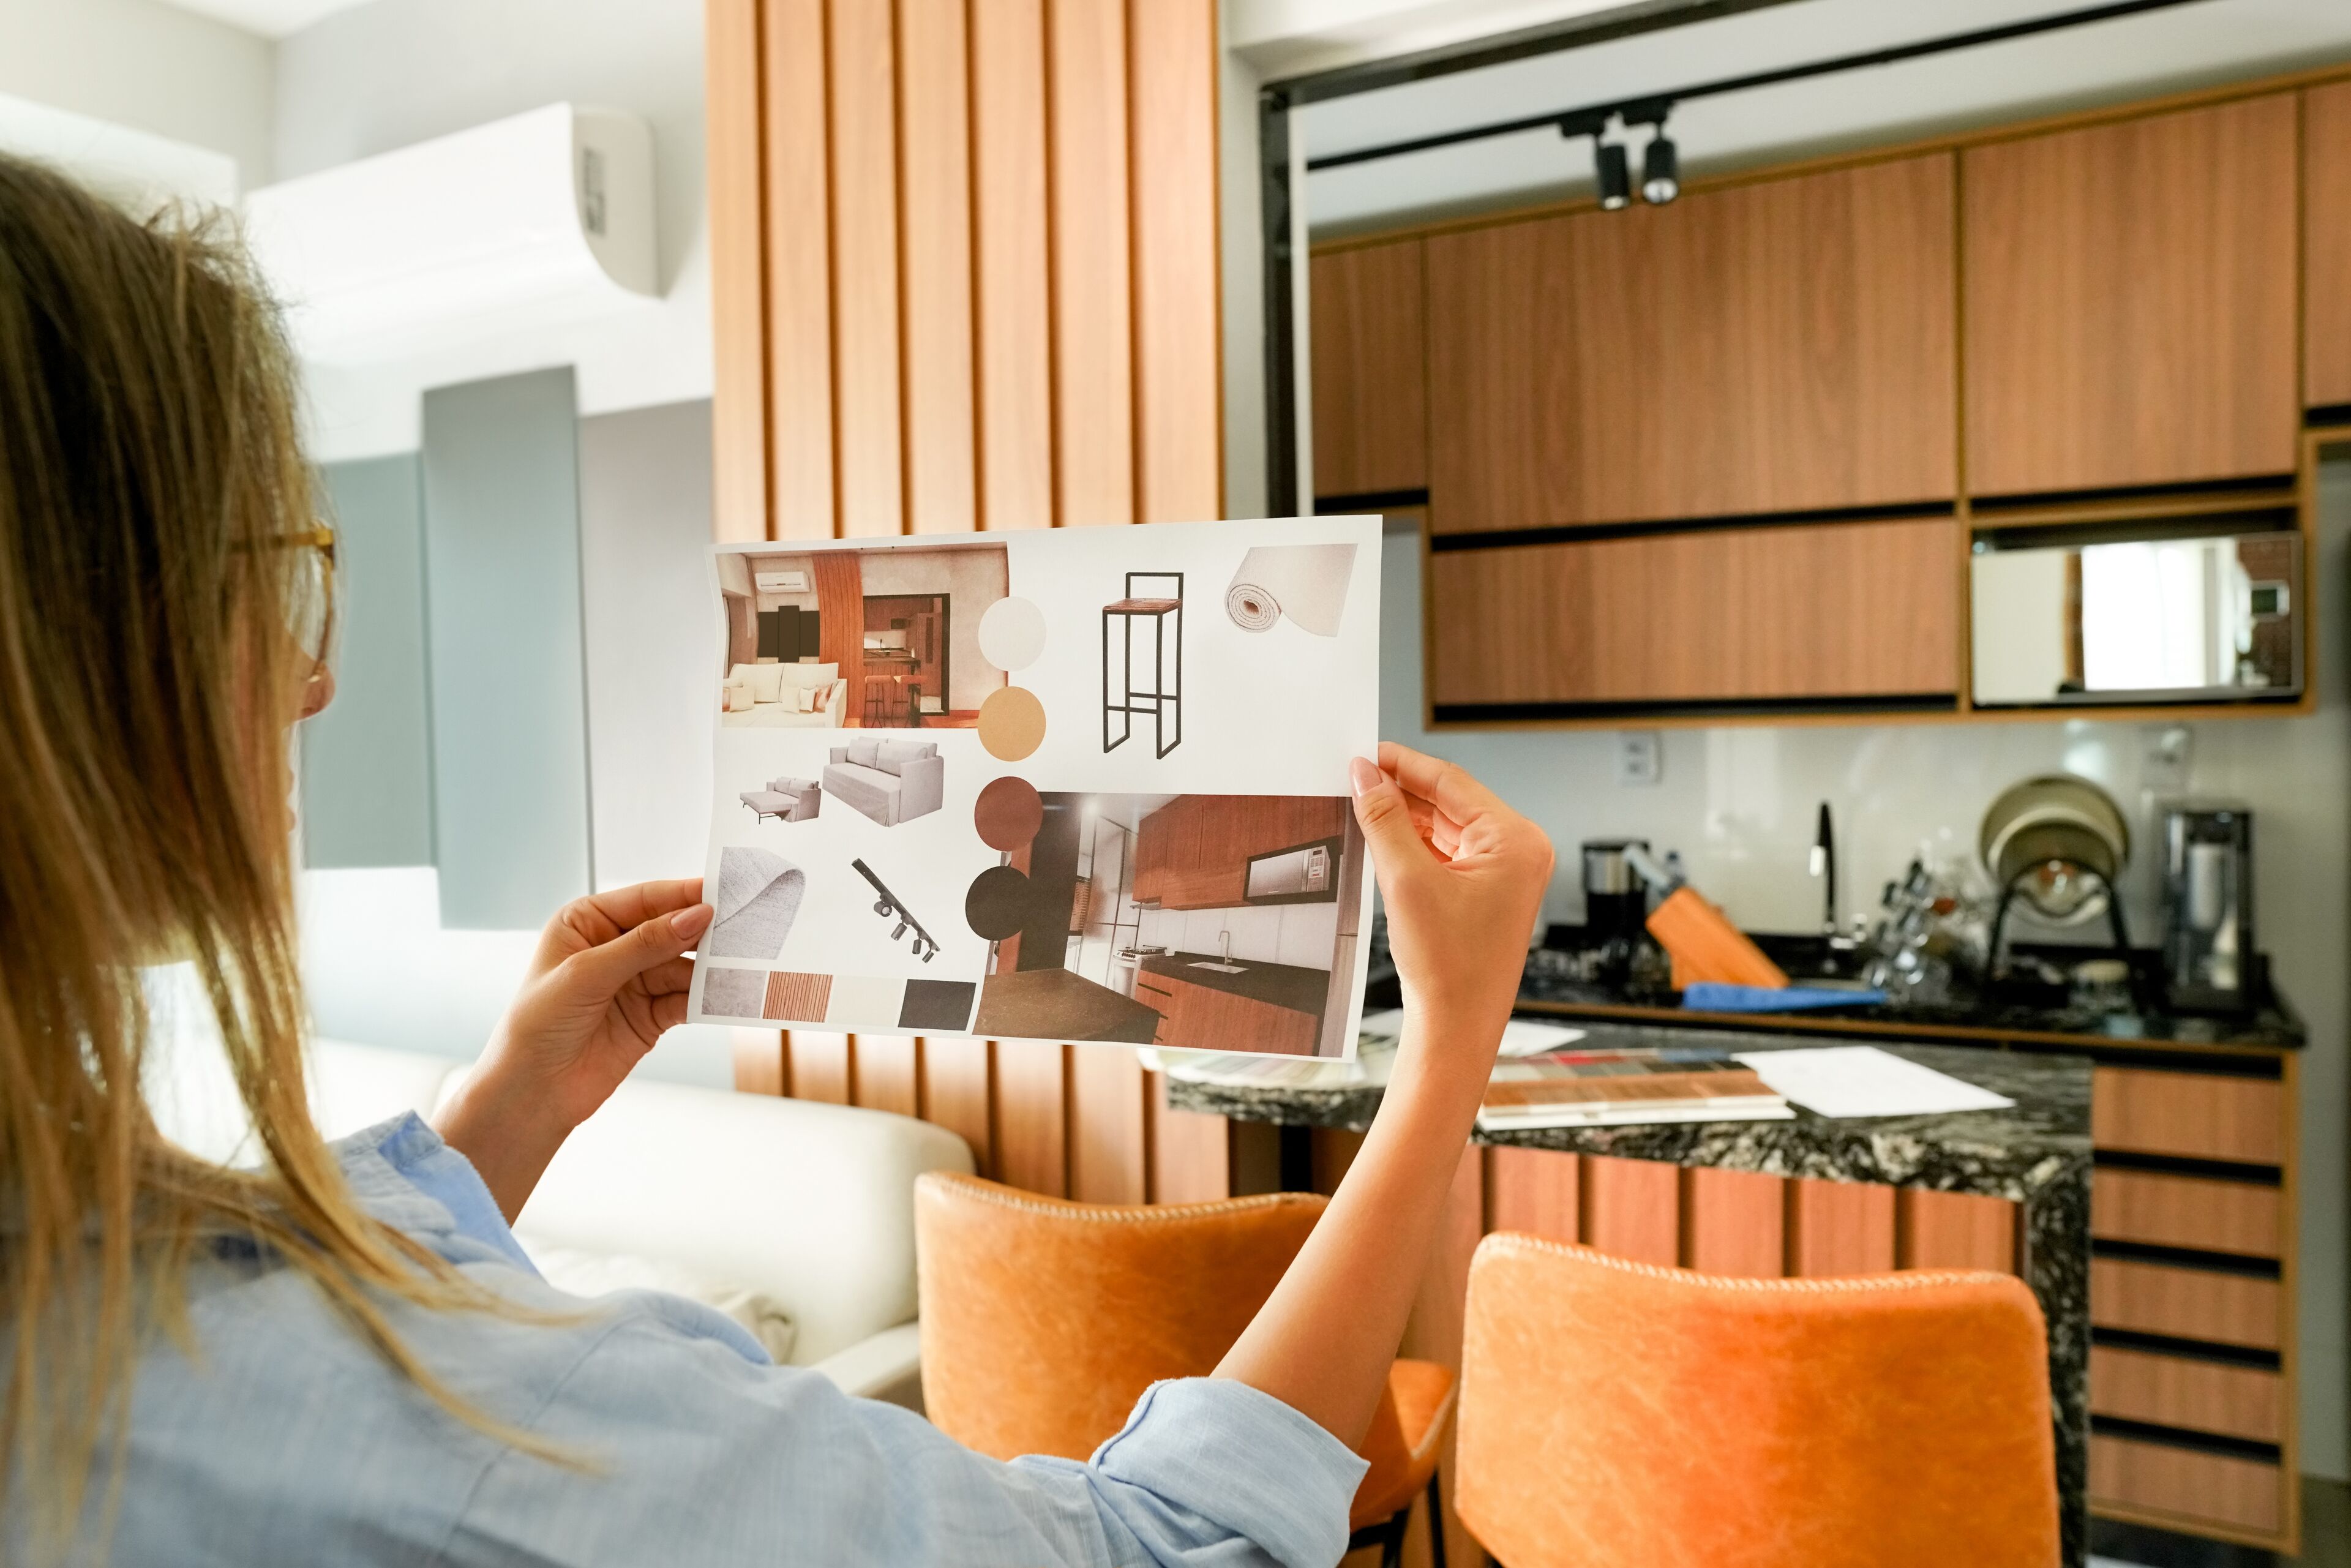 A person examines a mood board containing various interior design elements for a home renovation project.